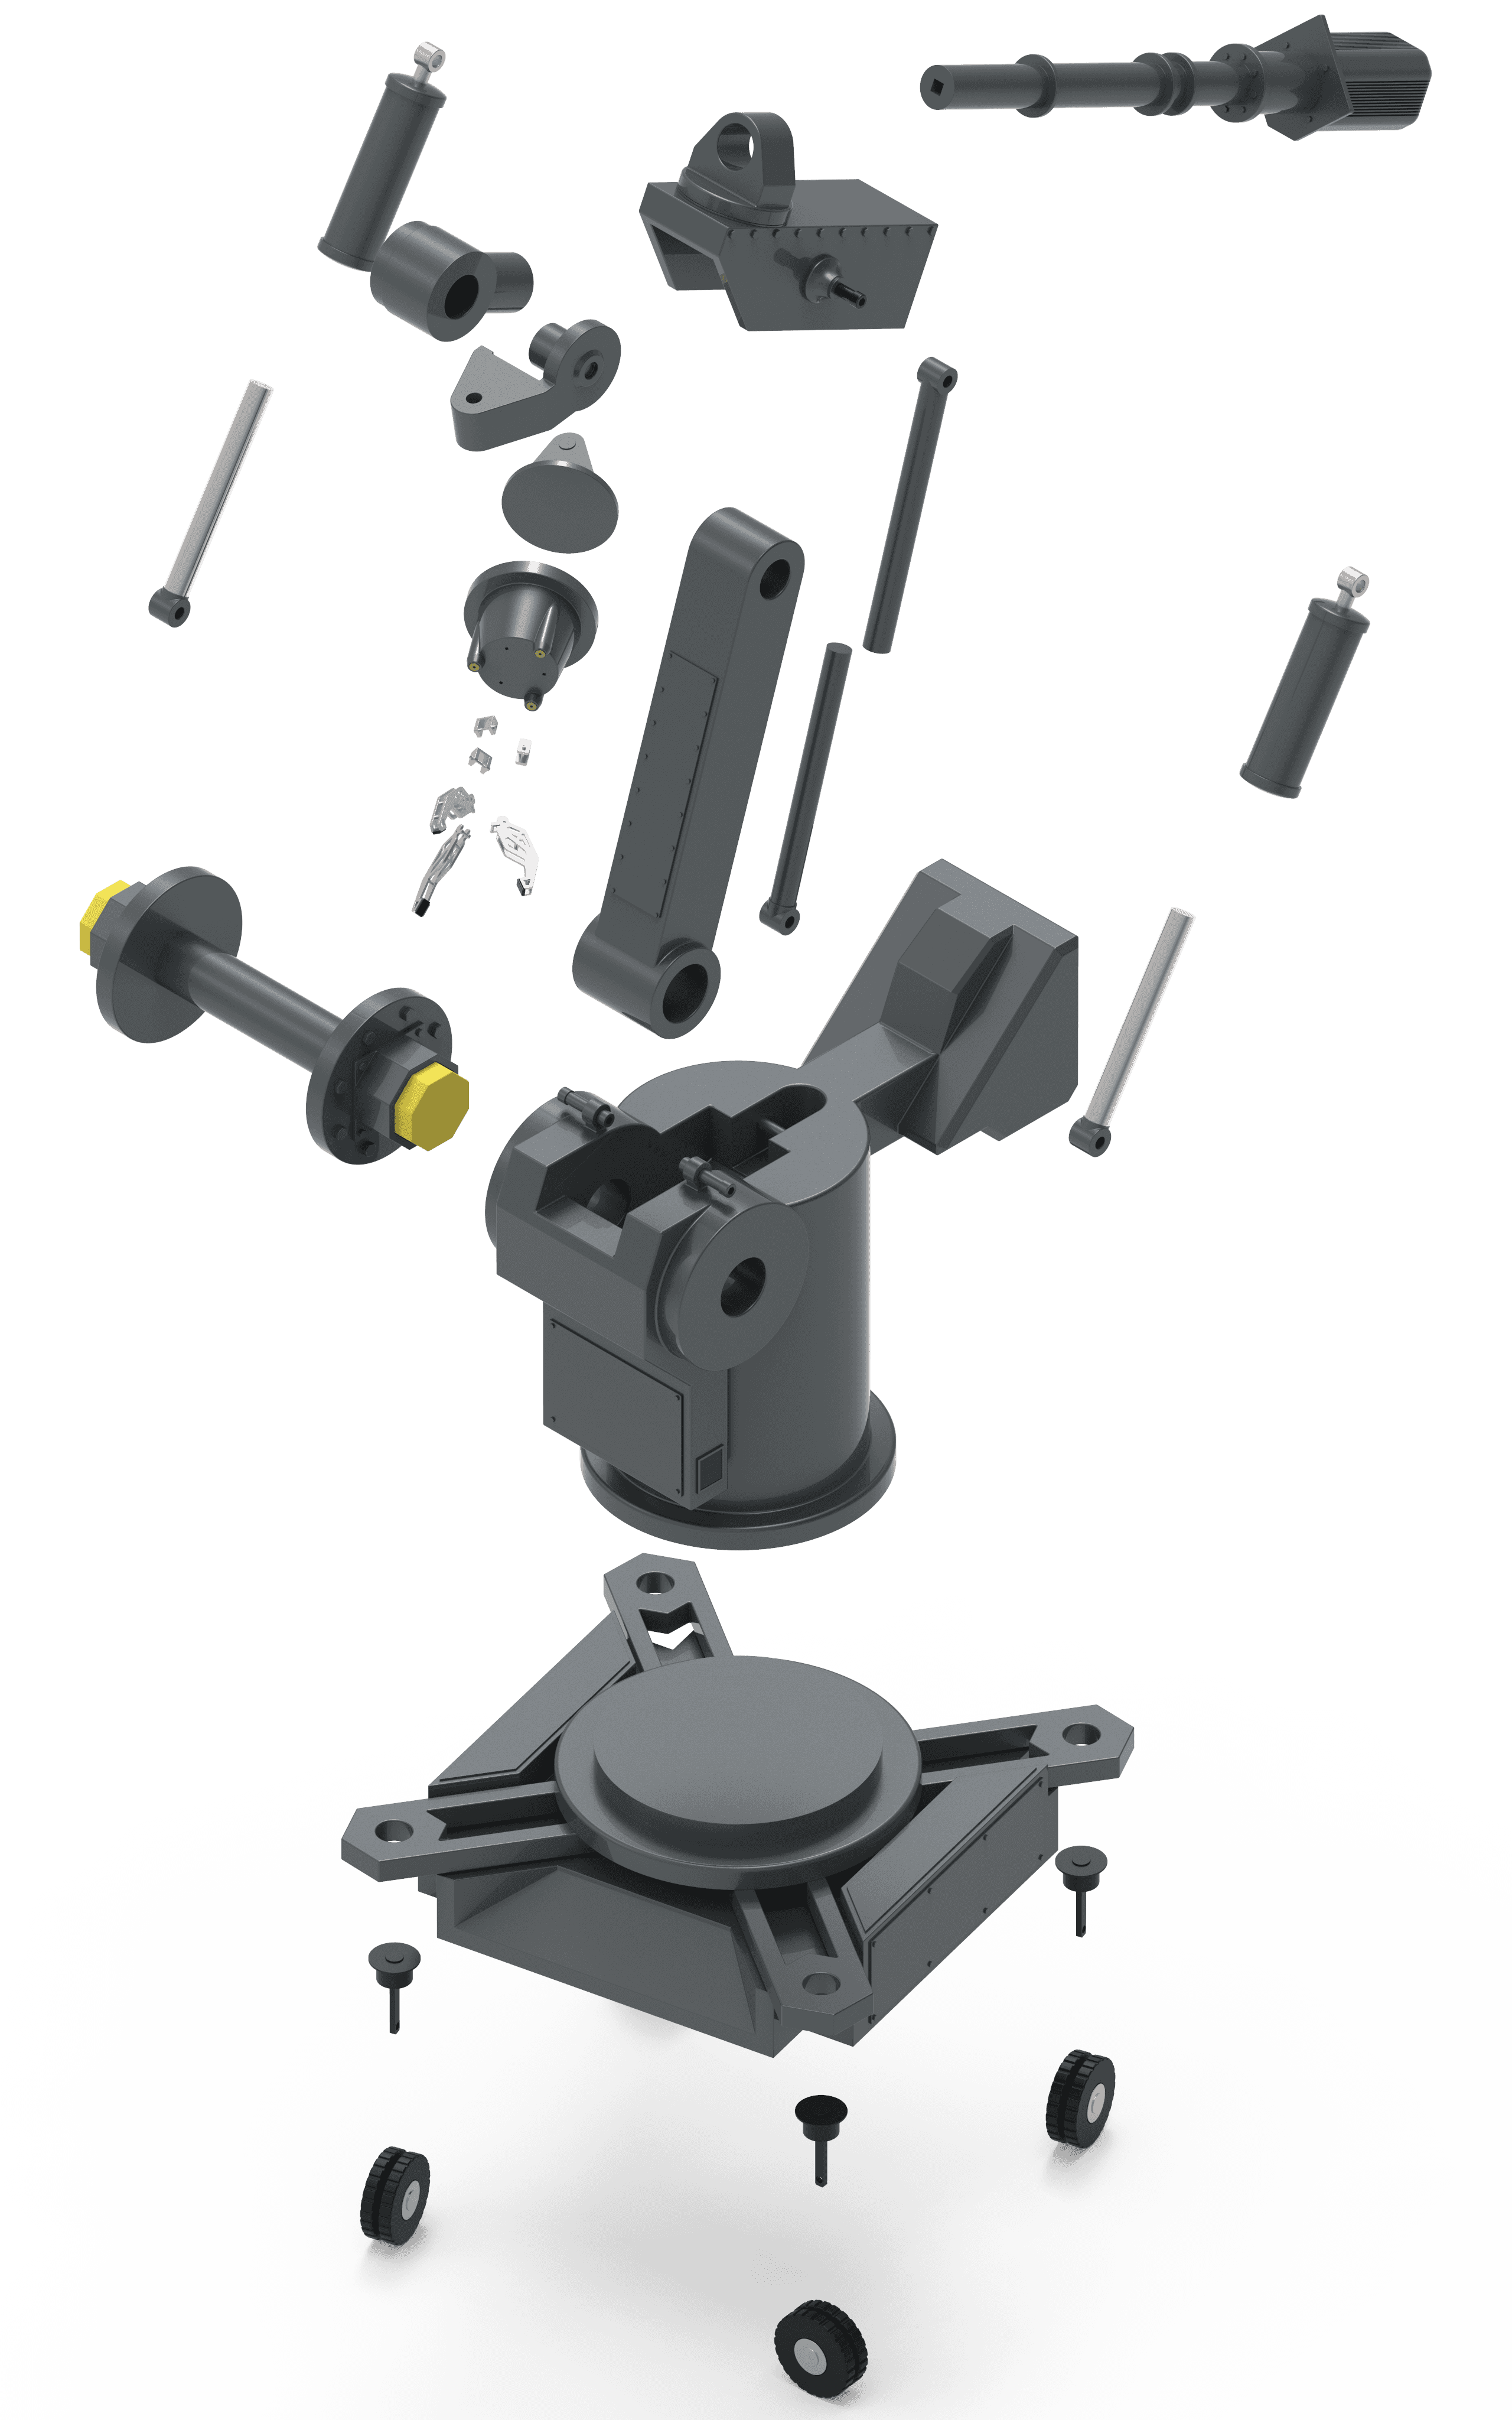 Iron Man Robot - Exploded view - 3d model